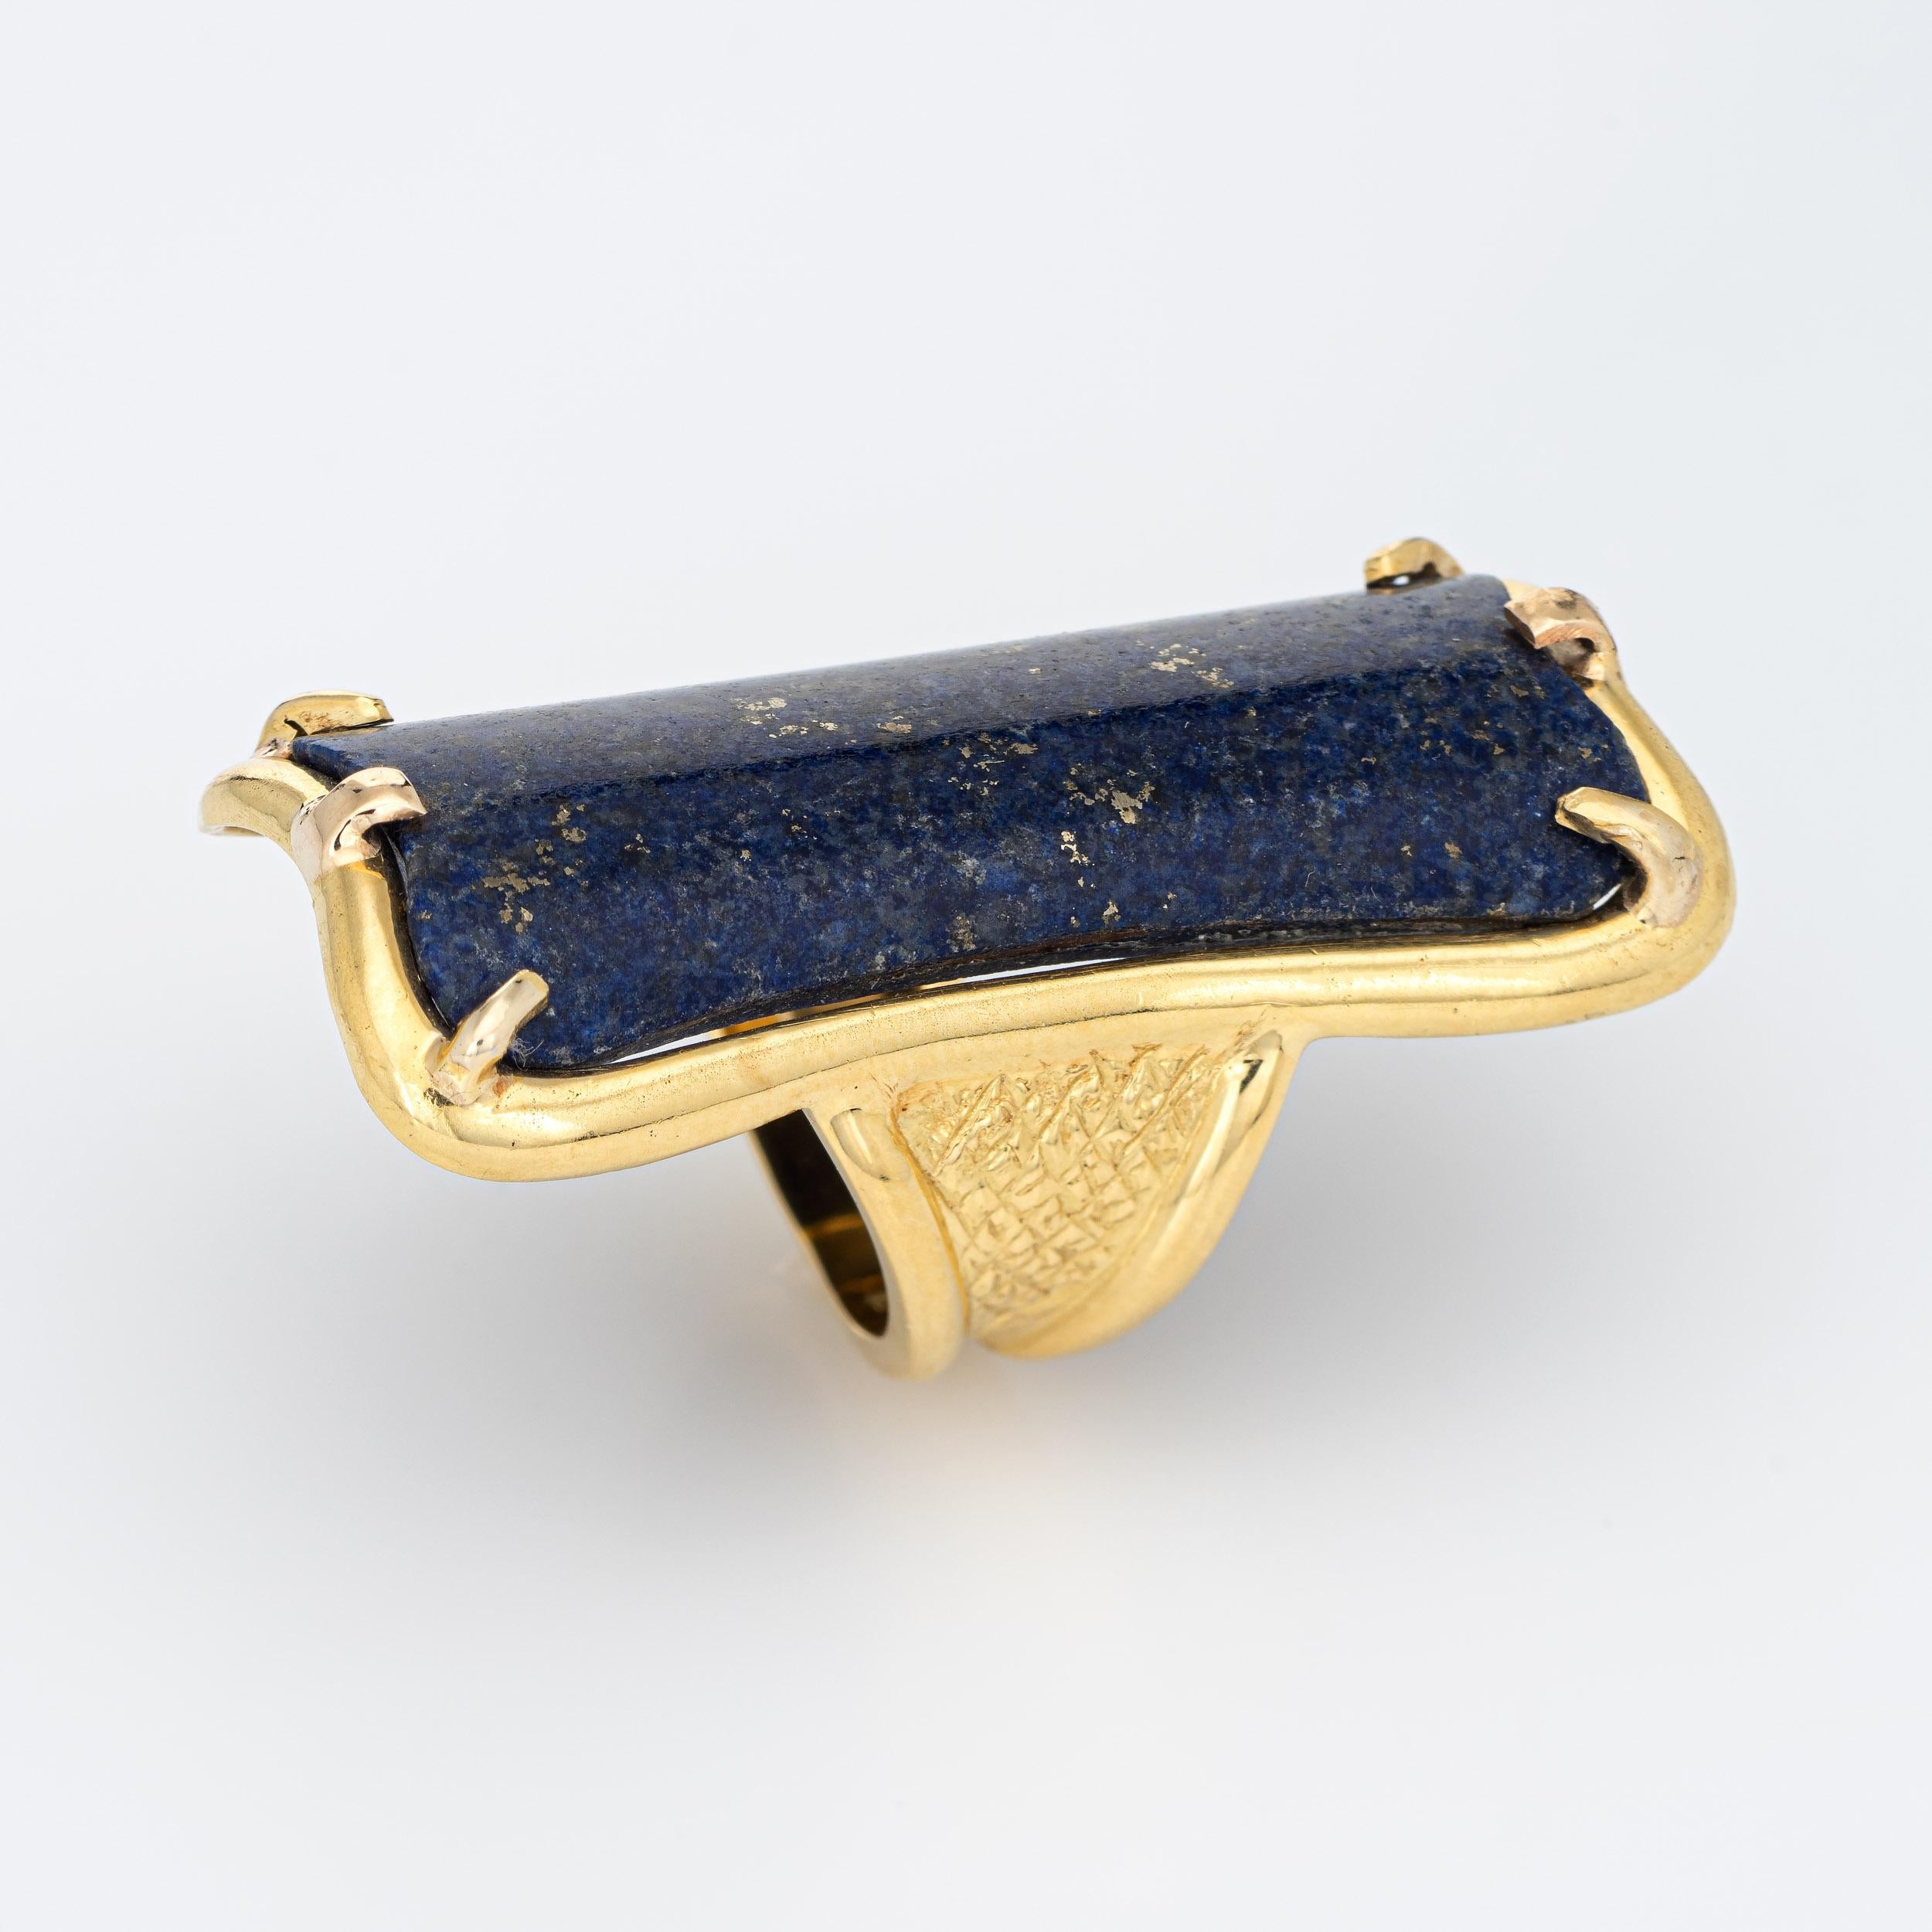 Stylish vintage lapis lazuli cocktail ring (circa 1960s to 1970s) crafted in 18 karat yellow gold. 

Lapis lazuli measures 37mm x 15mm (in excellent condition and free of cracks or chips). 

The exceptional vintage ring is one of the biggest and